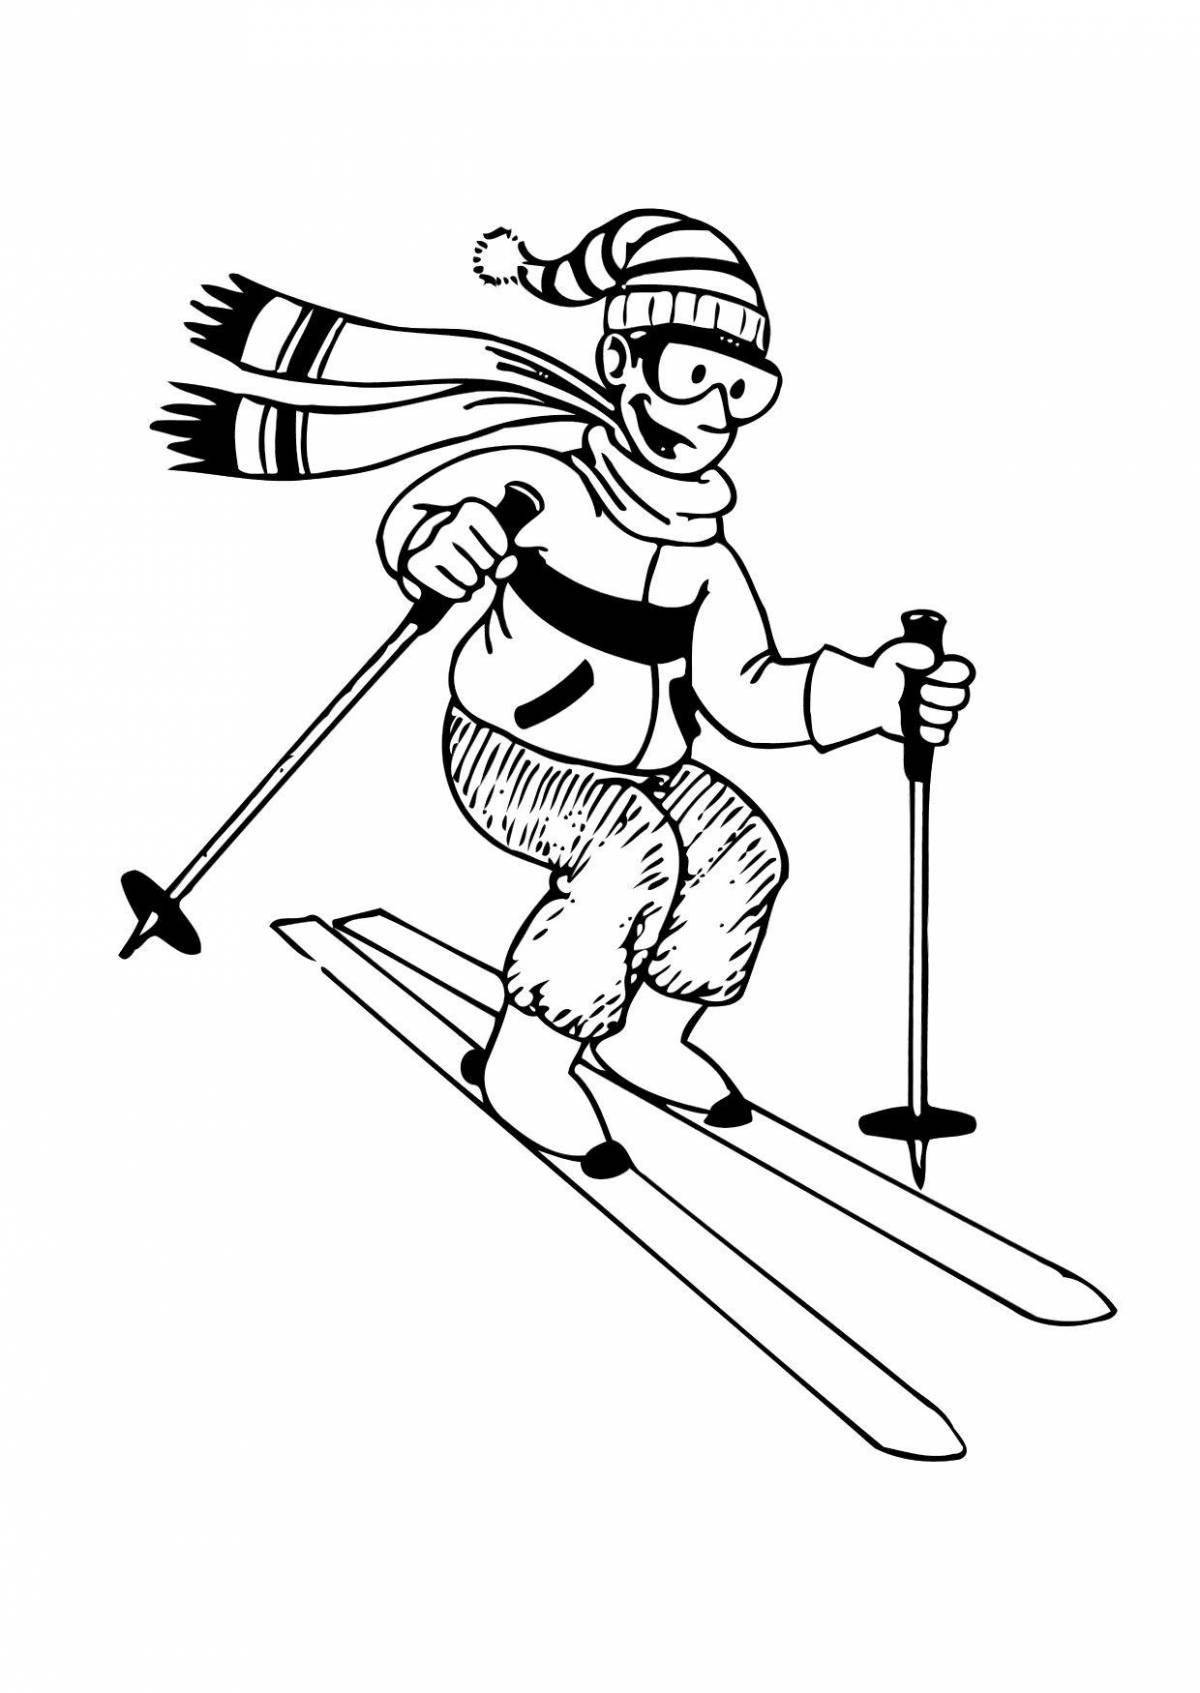 Joy skis for 3-4 year olds